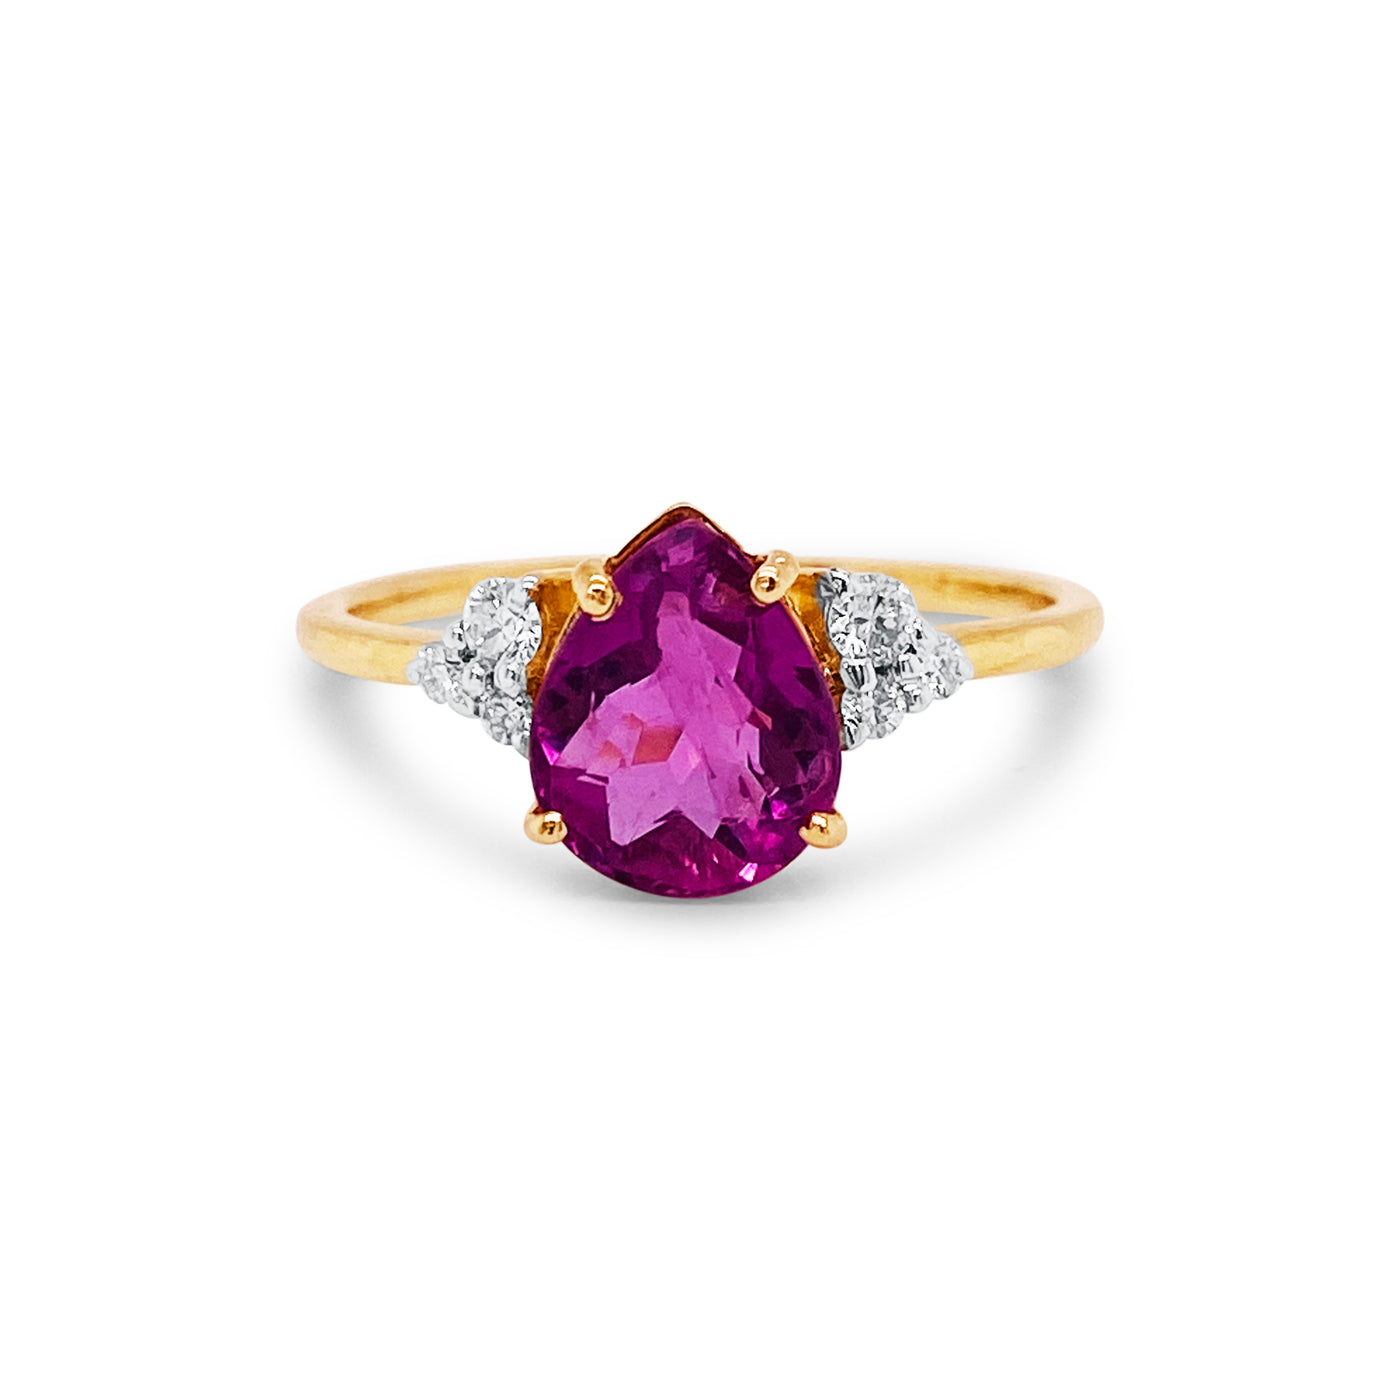 Pink Tourmaline Pear Shape And Diamond Ring In 18K Yellow Gold